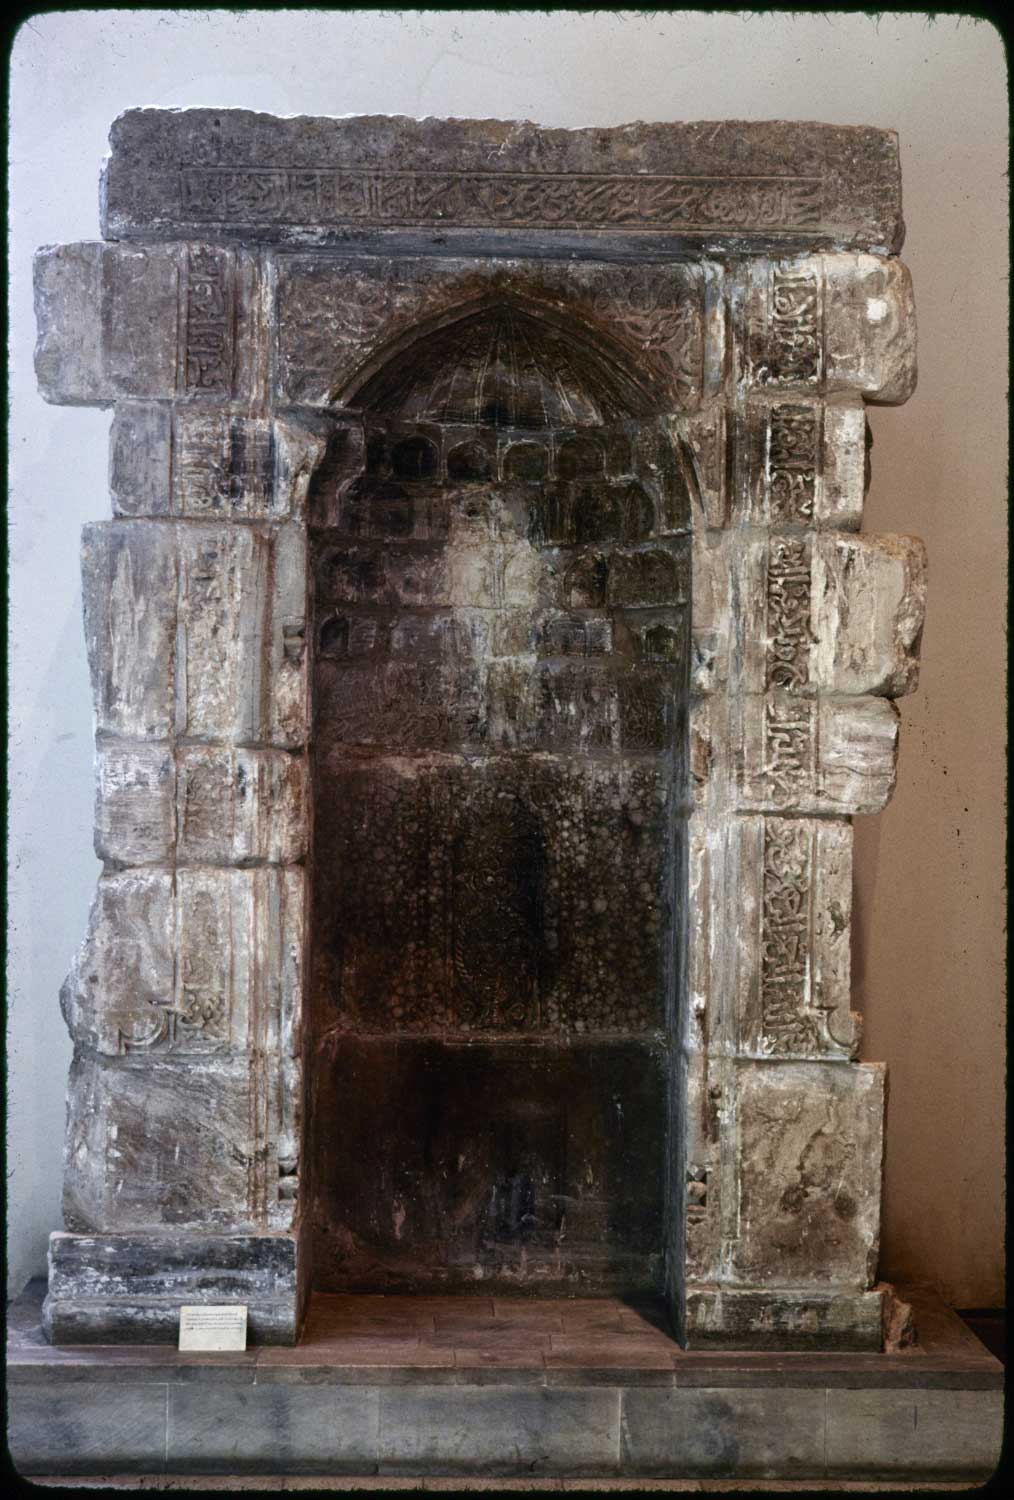 Marble mihrab from the mosque, displayed in a museum.